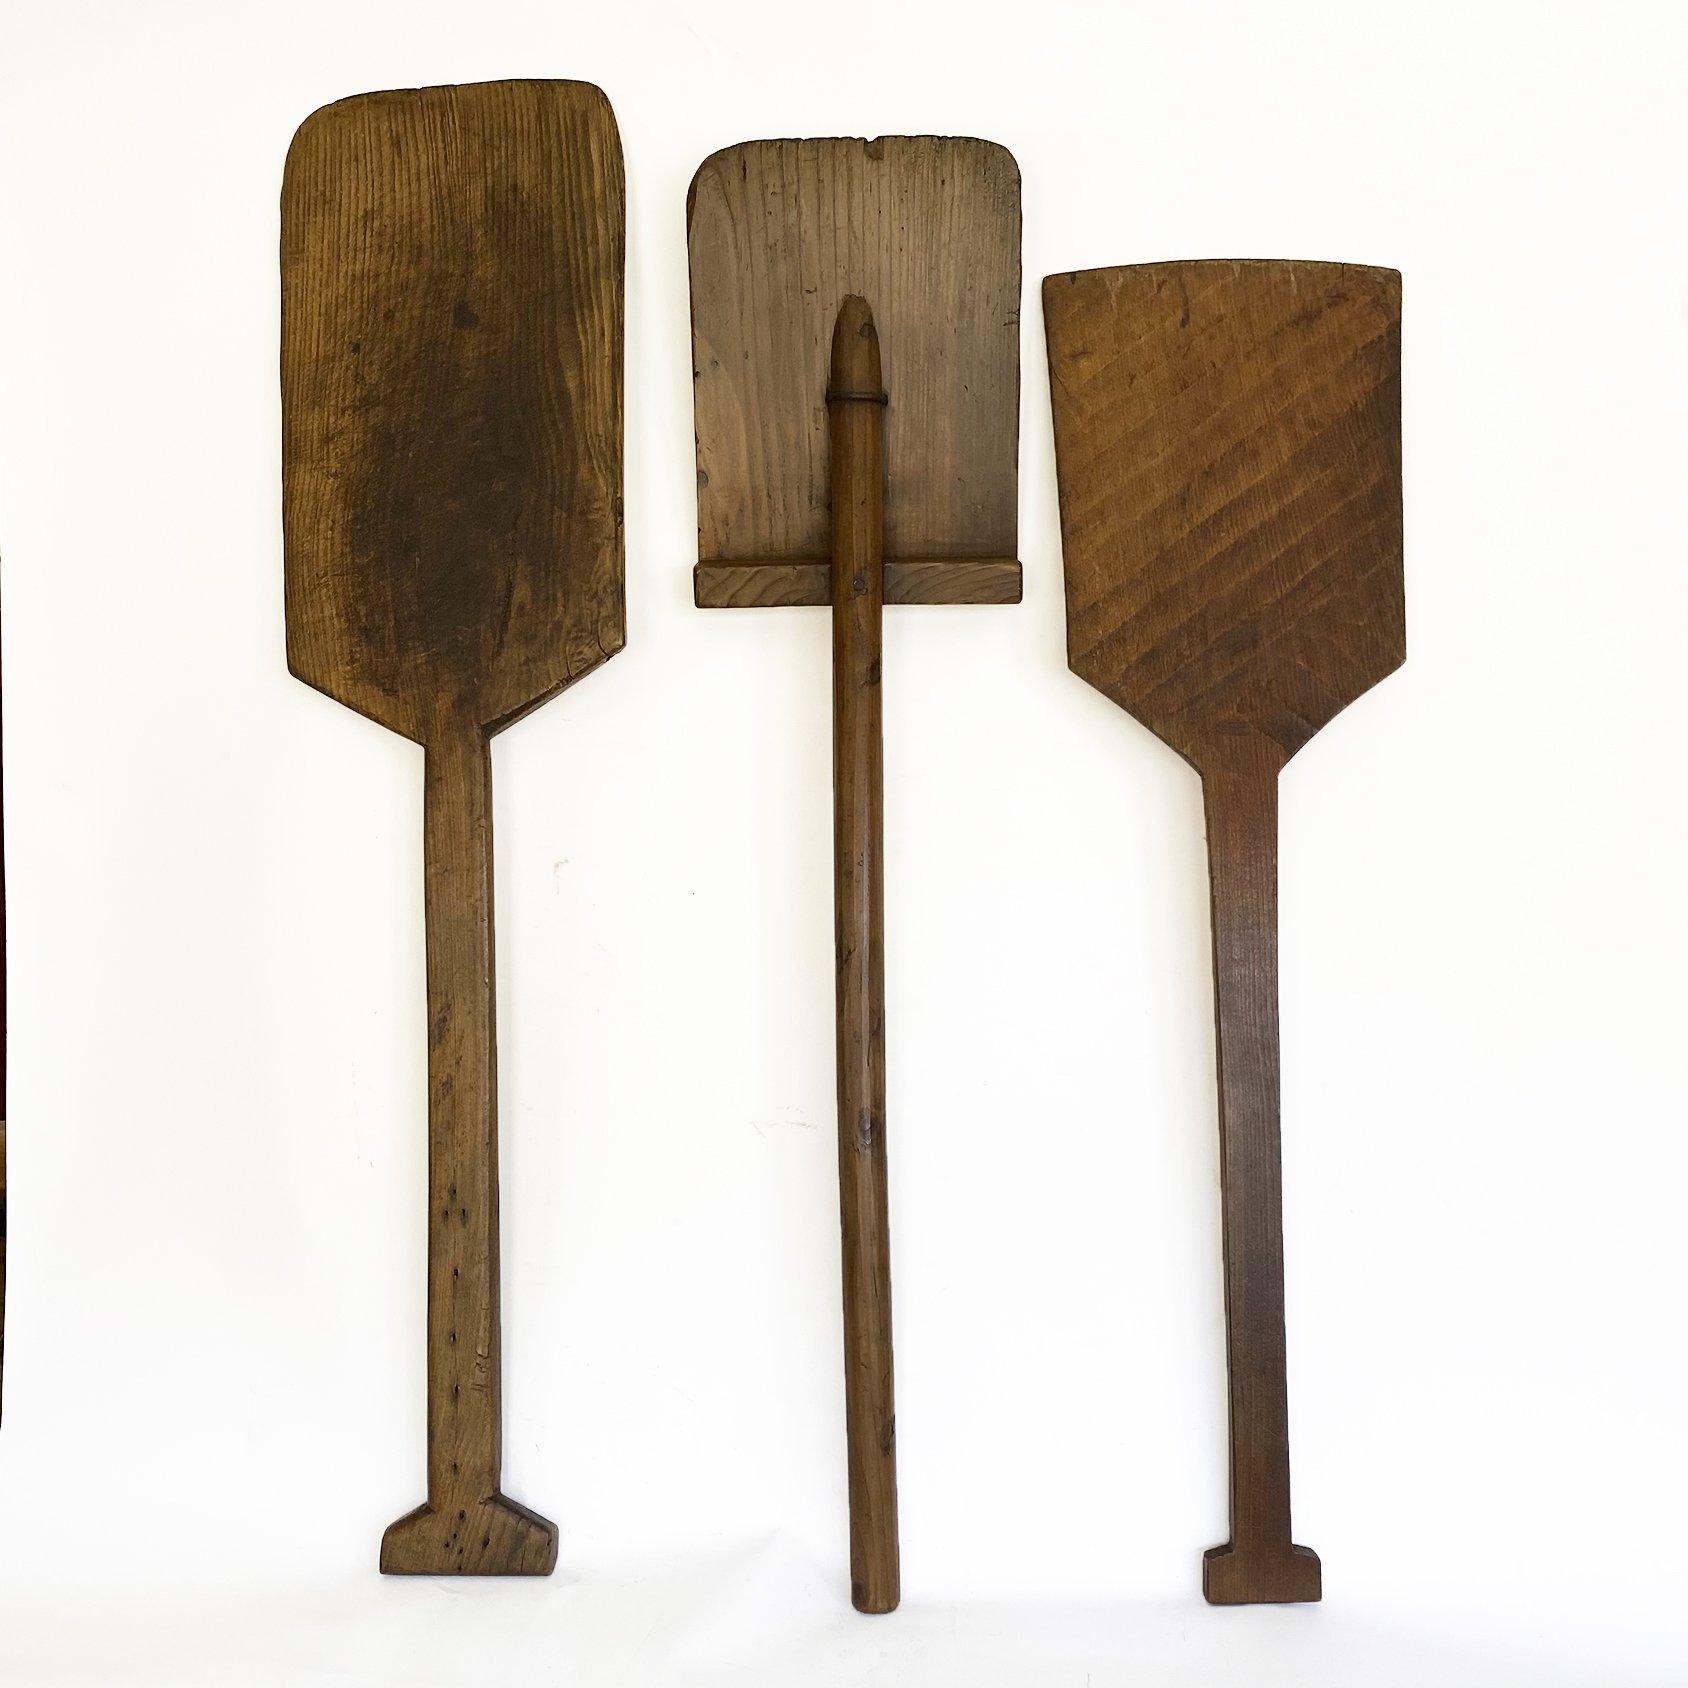 Early 20th century antique wood snow shovels, Japan, set of three (3)
Handcrafted wooden snow shovels, each one constructed of different wood and made to suit the person's level of comfort in using the tool to generate maximum efficient use. They